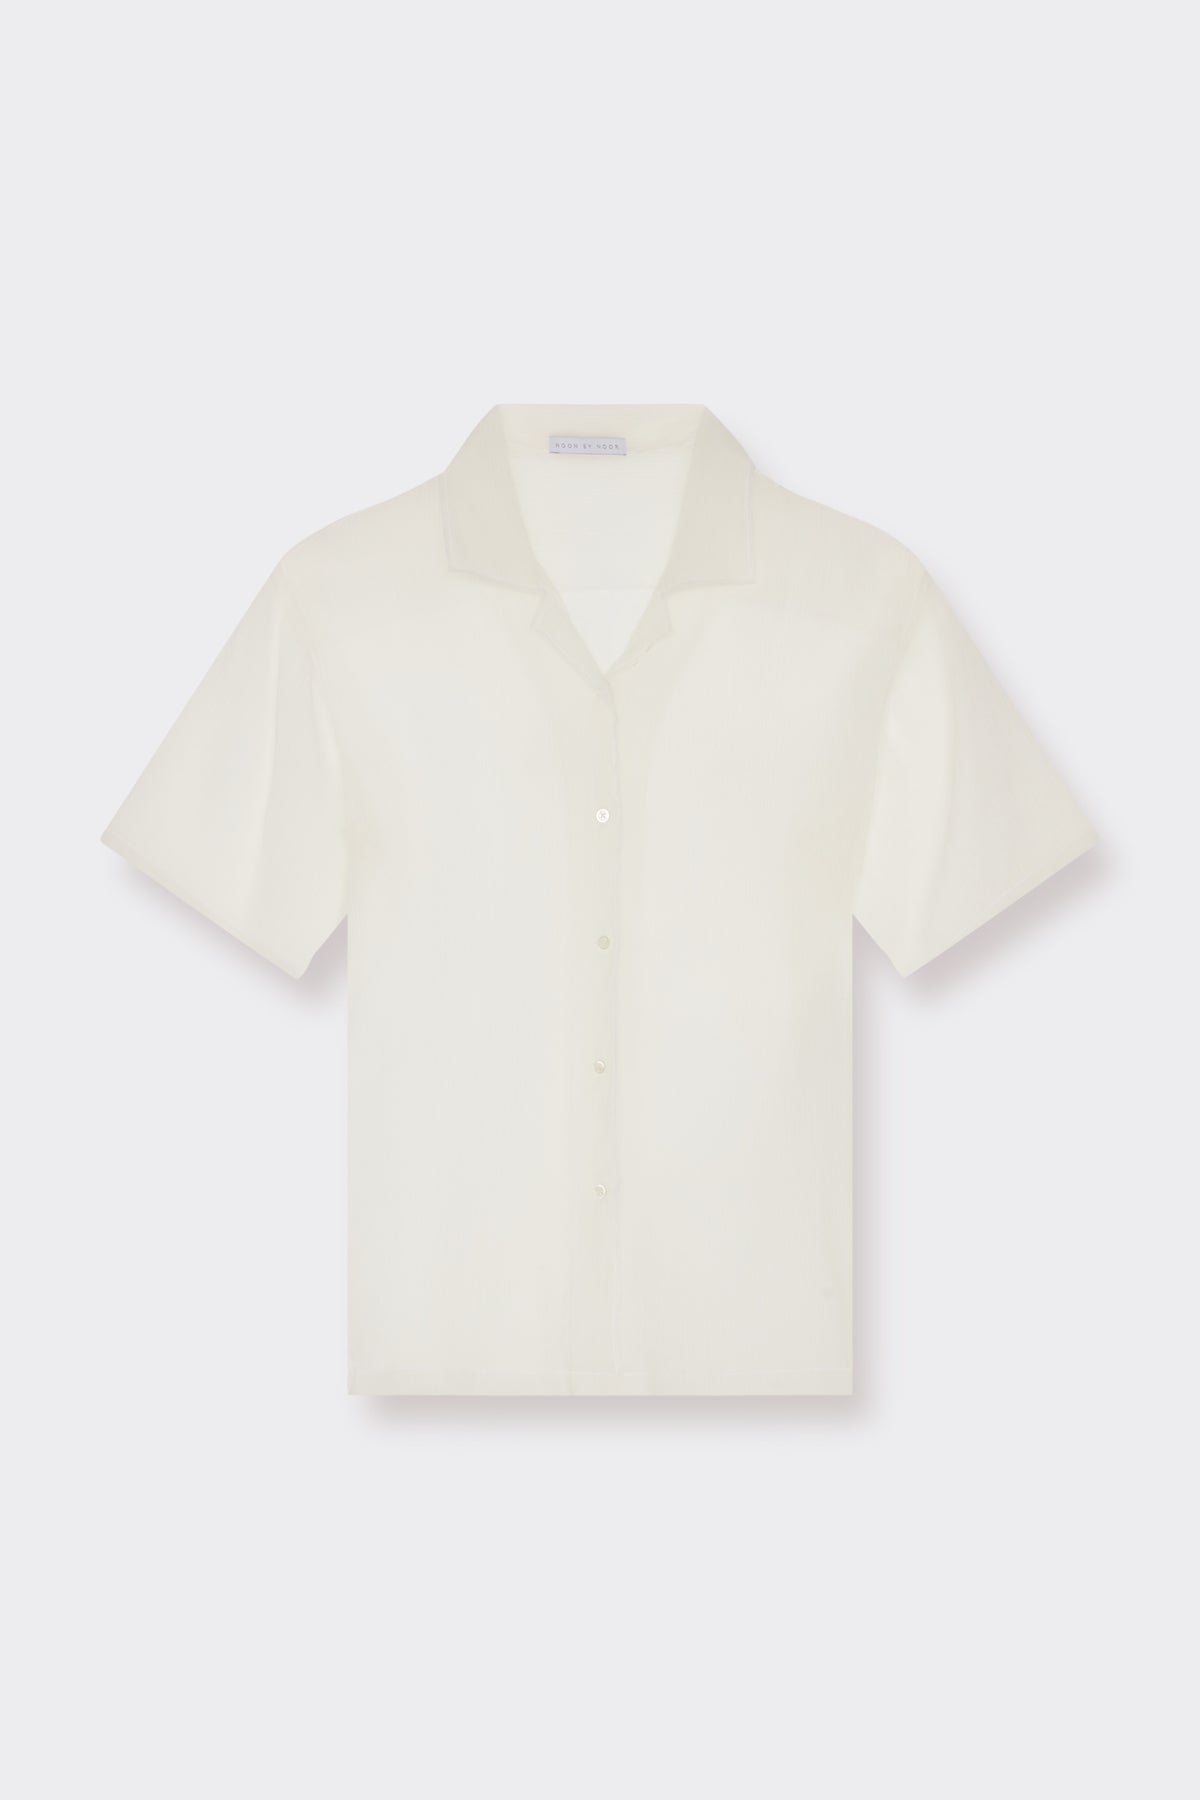 Floris Shirt in Soft White | Noon By Noor